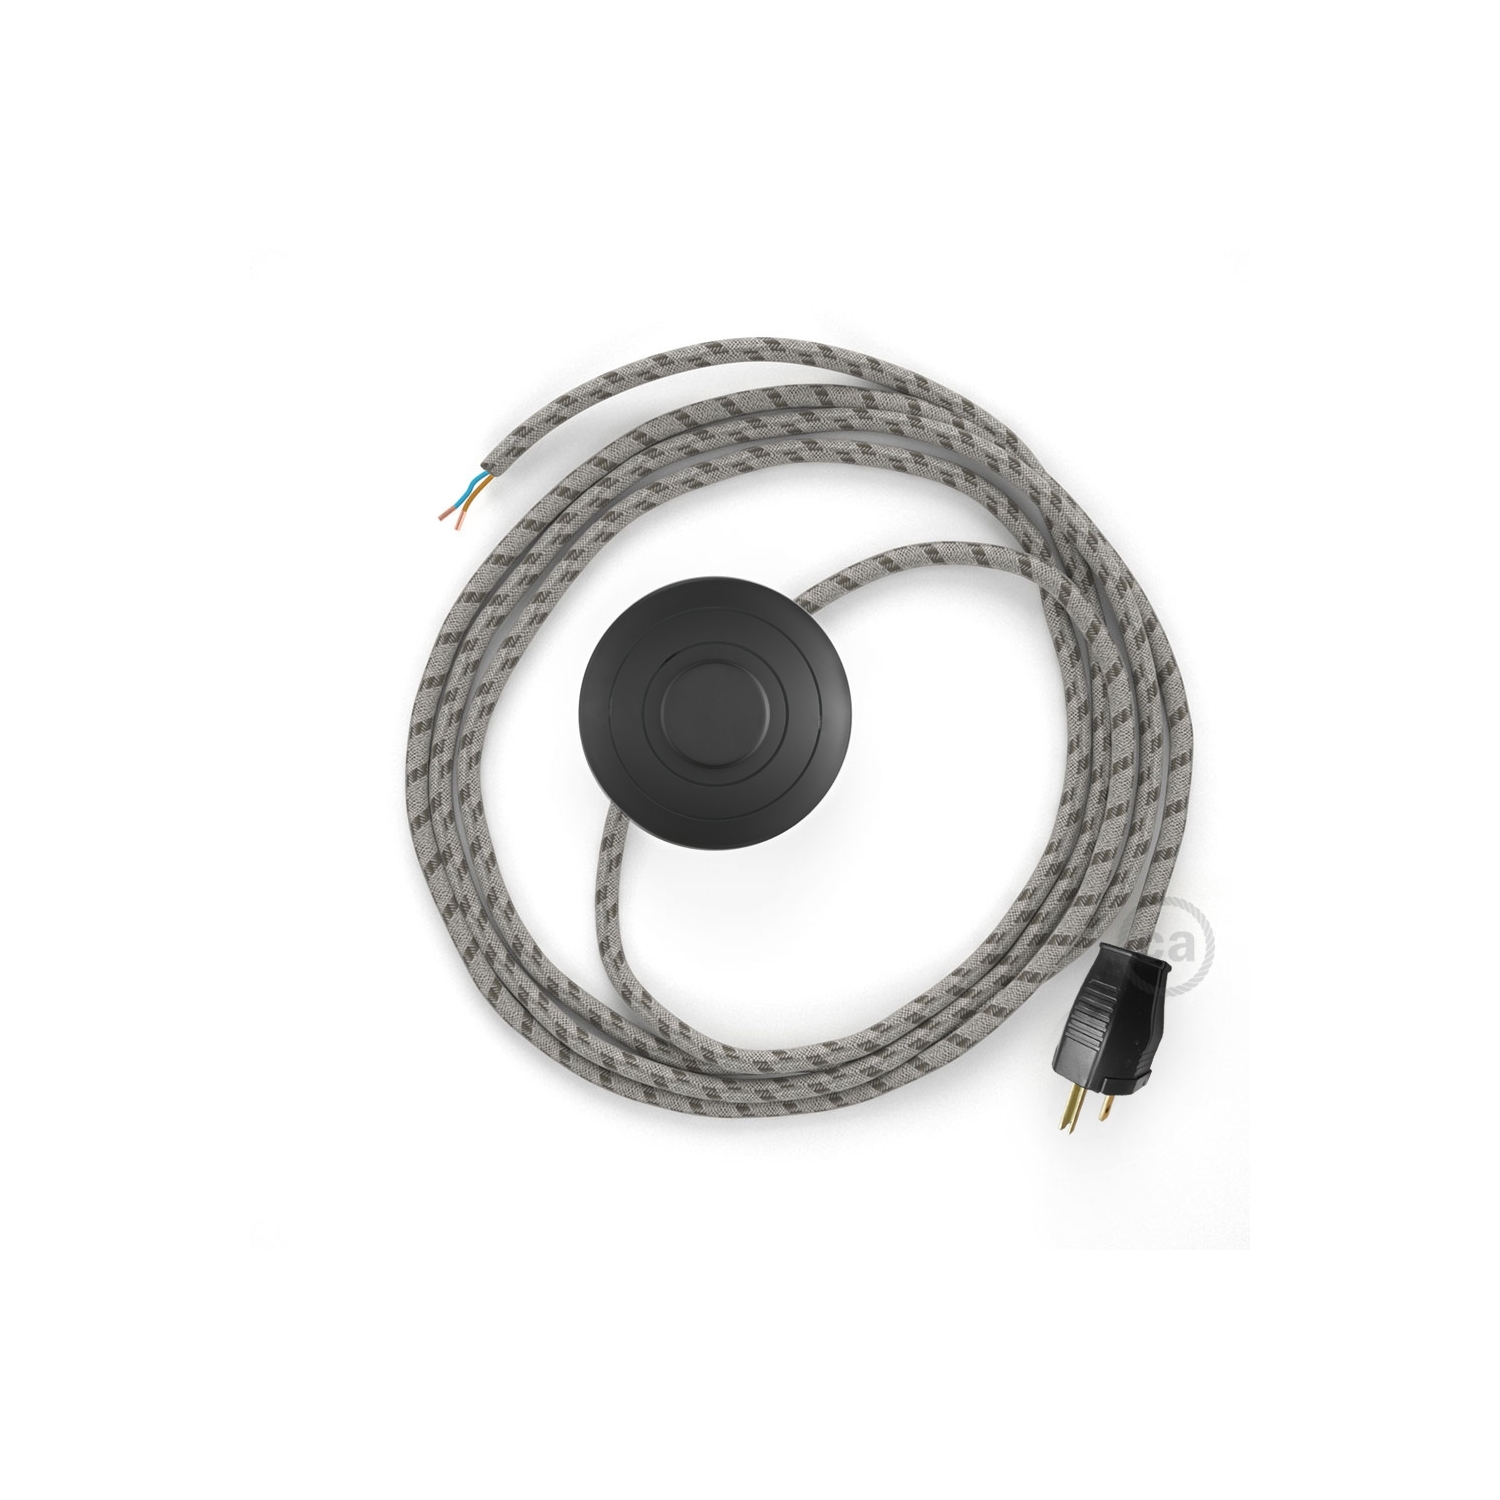 Power Cord with foot switch, RD53 Natural & Brown Linen Stripe - Choose color of switch/plug